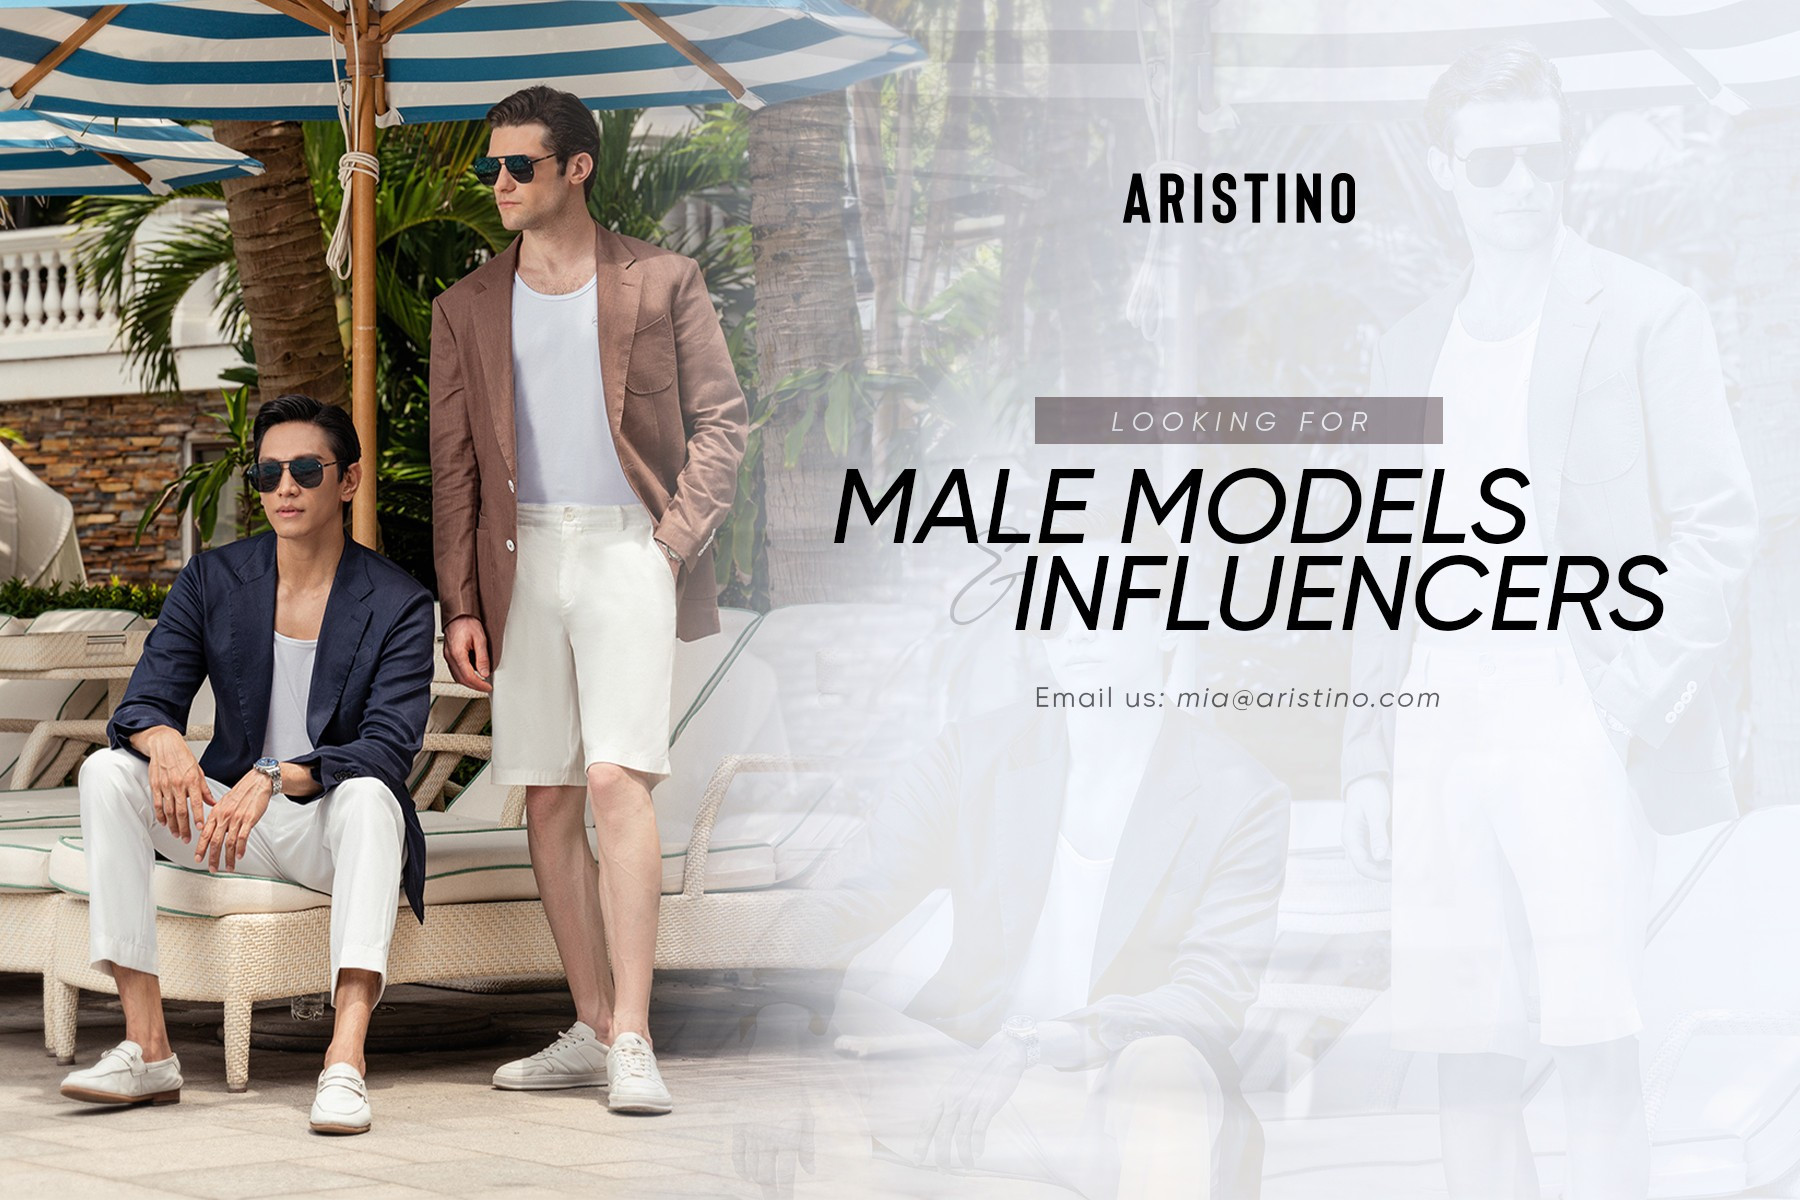 Aristino Philippines the premium men's fashion brand from Vietnam, has officially arrived in the Philippines. We are on the lookout for male models and influencers to bring the essence of our brand to the people of the Philippines.